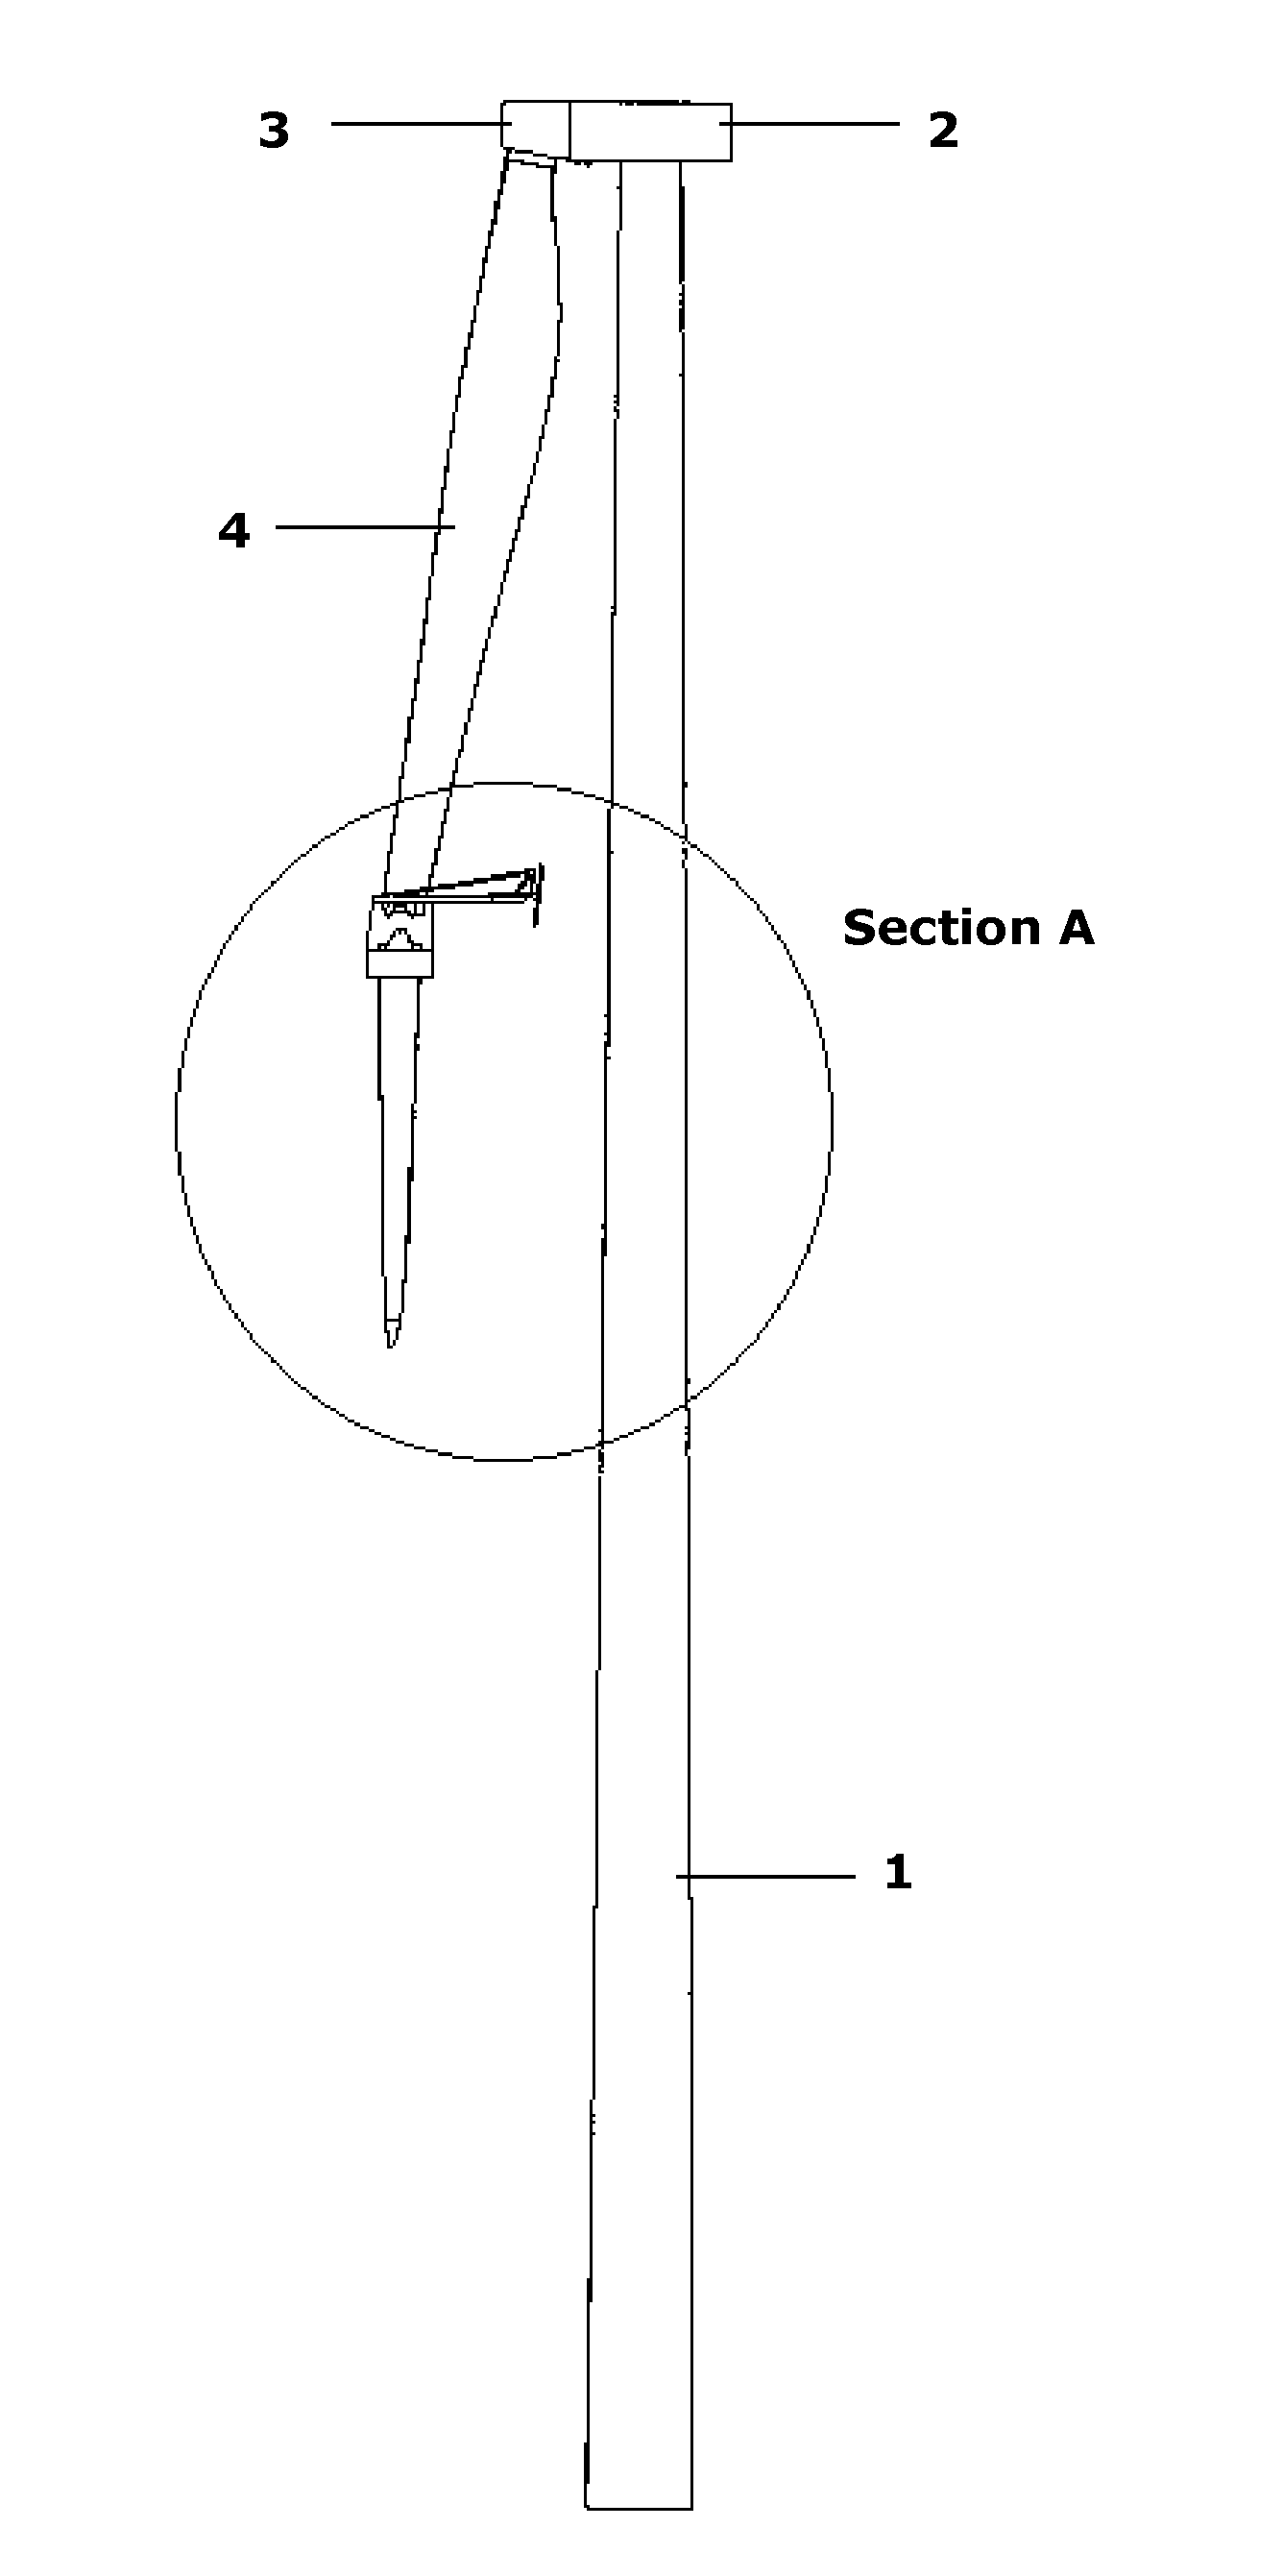 Lifting device for connecting two rotor blade segments of a wind turbine